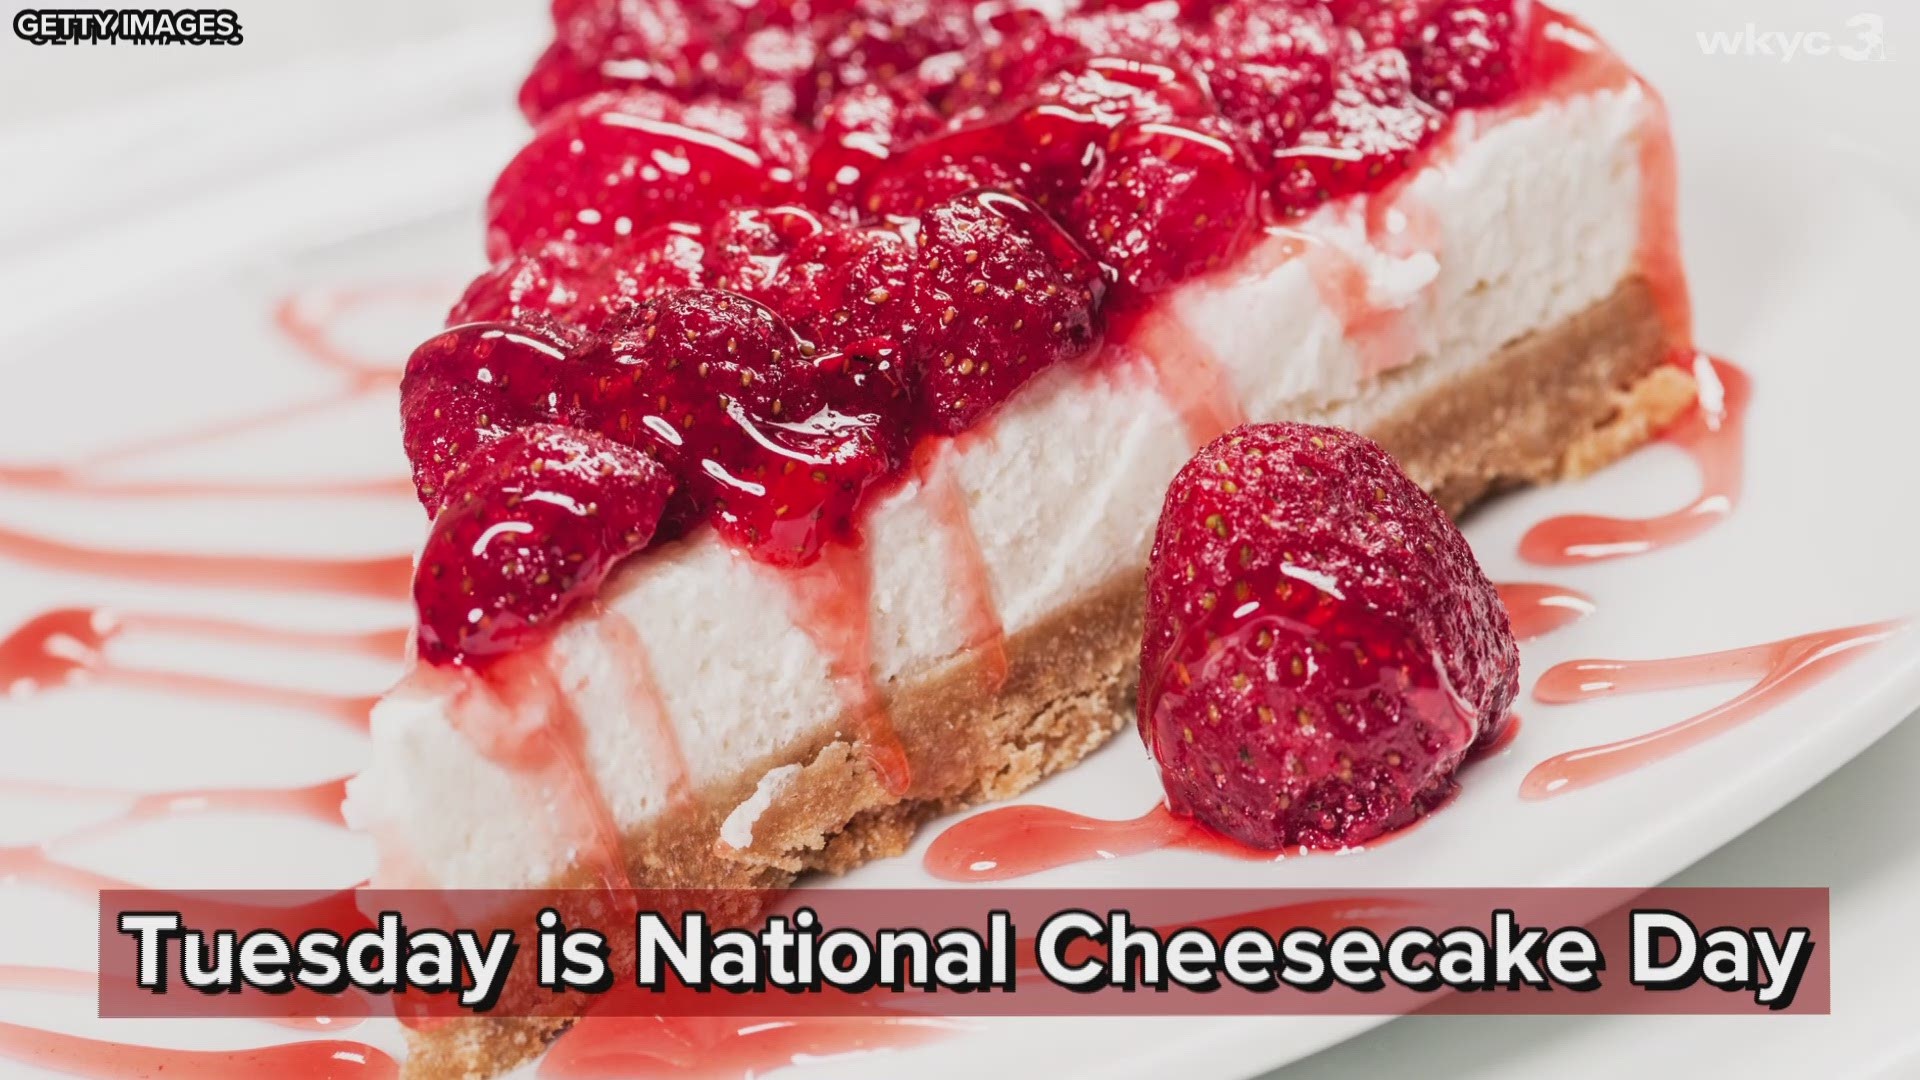 Tuesday is National Cheesecake Day, and the chain restaurant devoted to all things decadent is celebrating with a special offer.